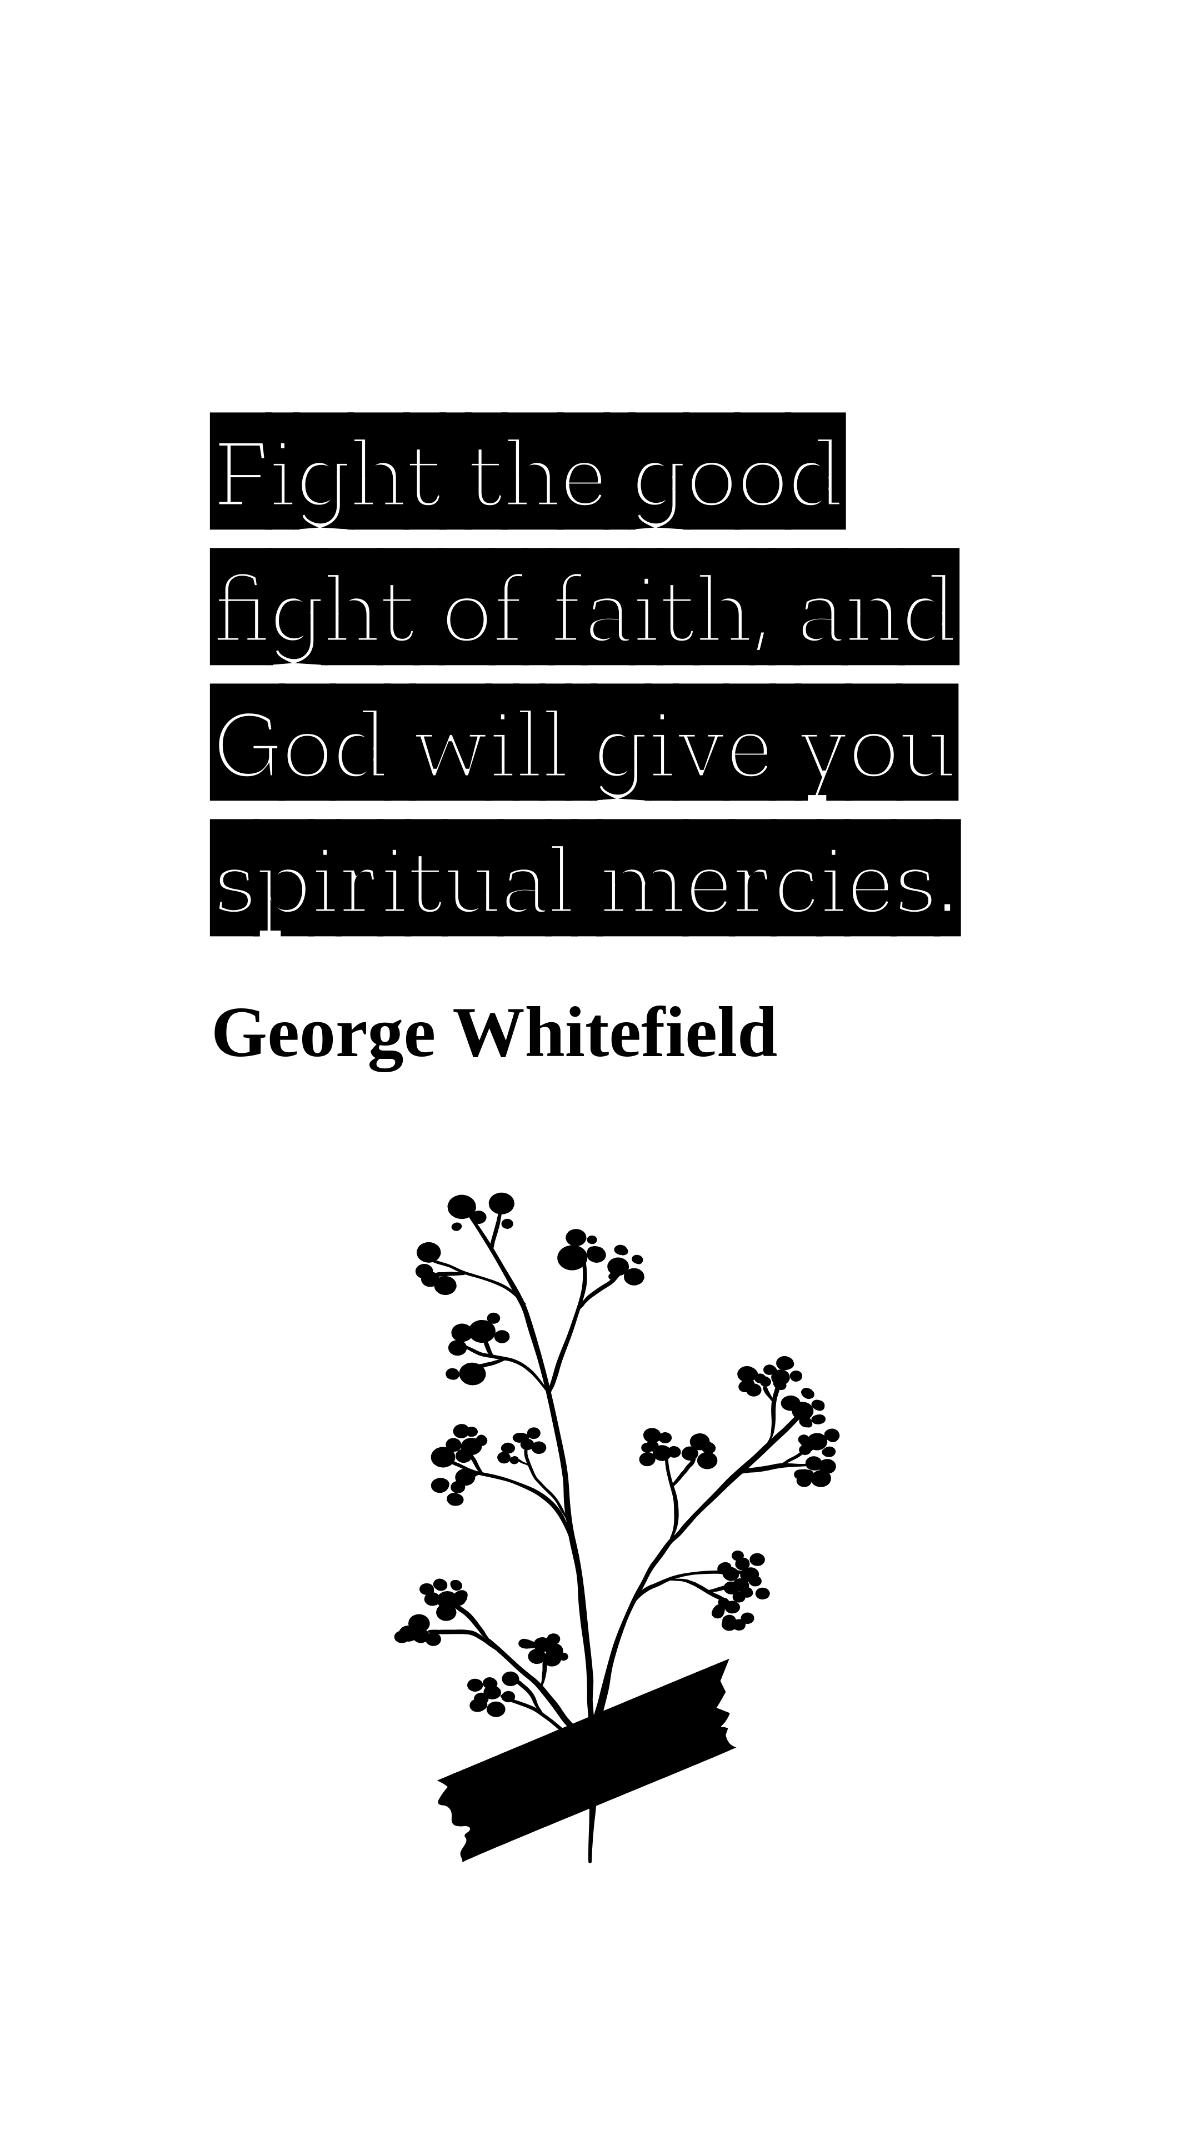 George Whitefield - Fight the good fight of faith, and God will give you spiritual mercies. Template